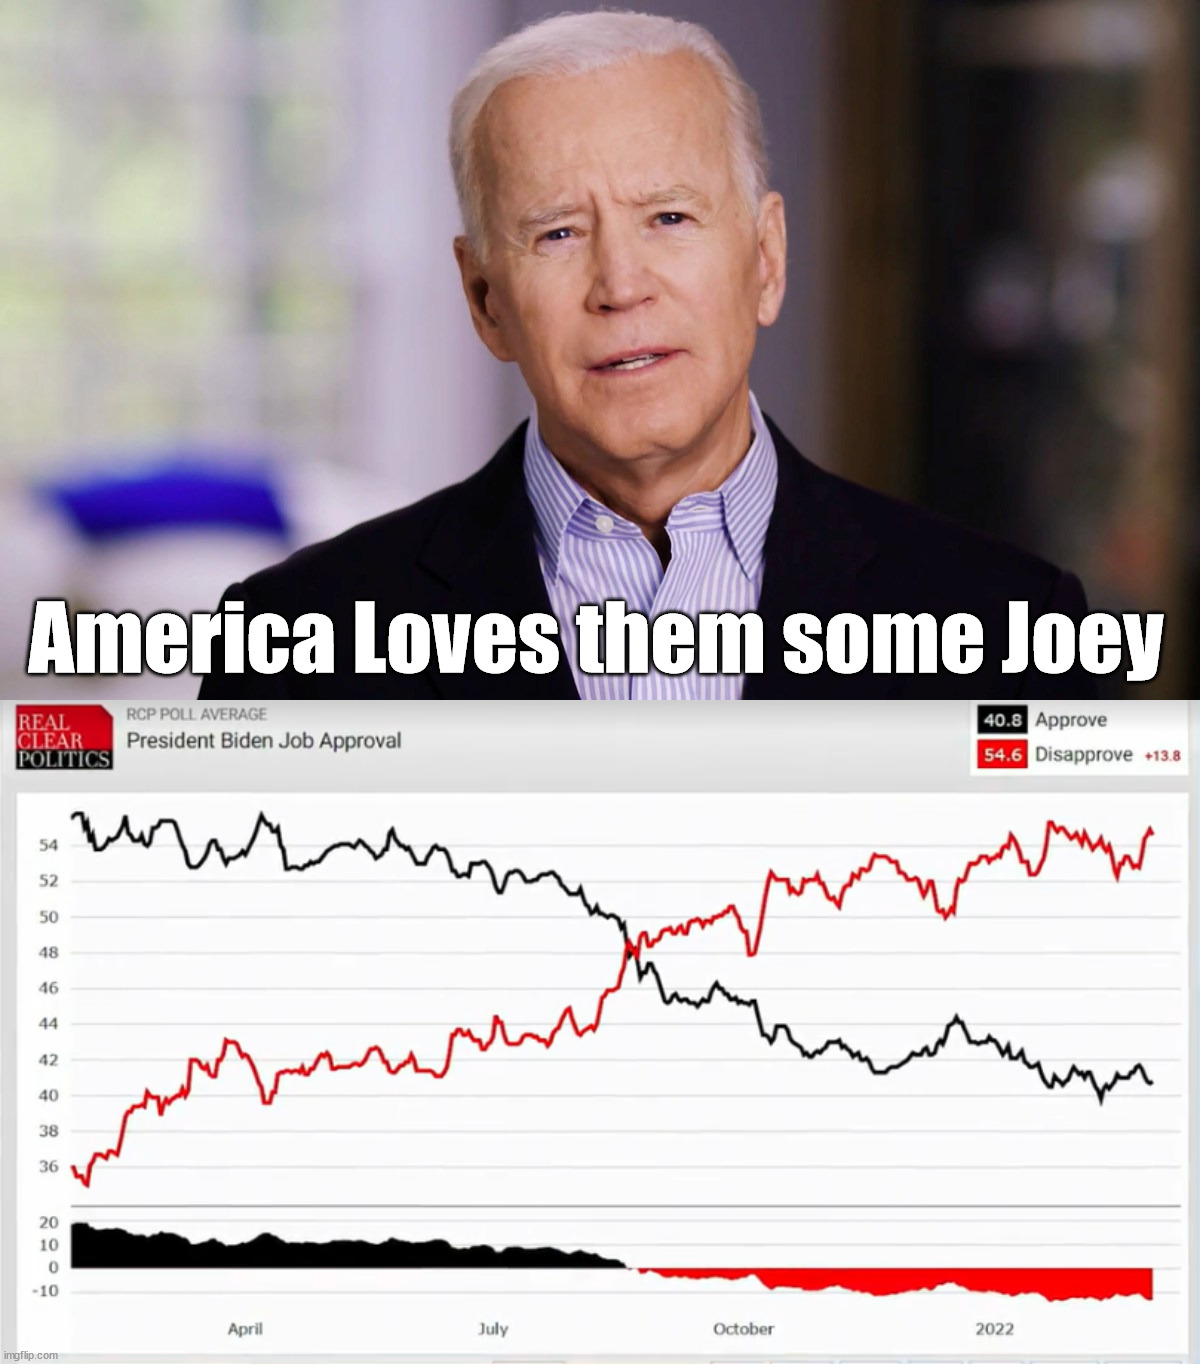 +13.8 disapproval rate | America Loves them some Joey | image tagged in joe biden 2020 | made w/ Imgflip meme maker